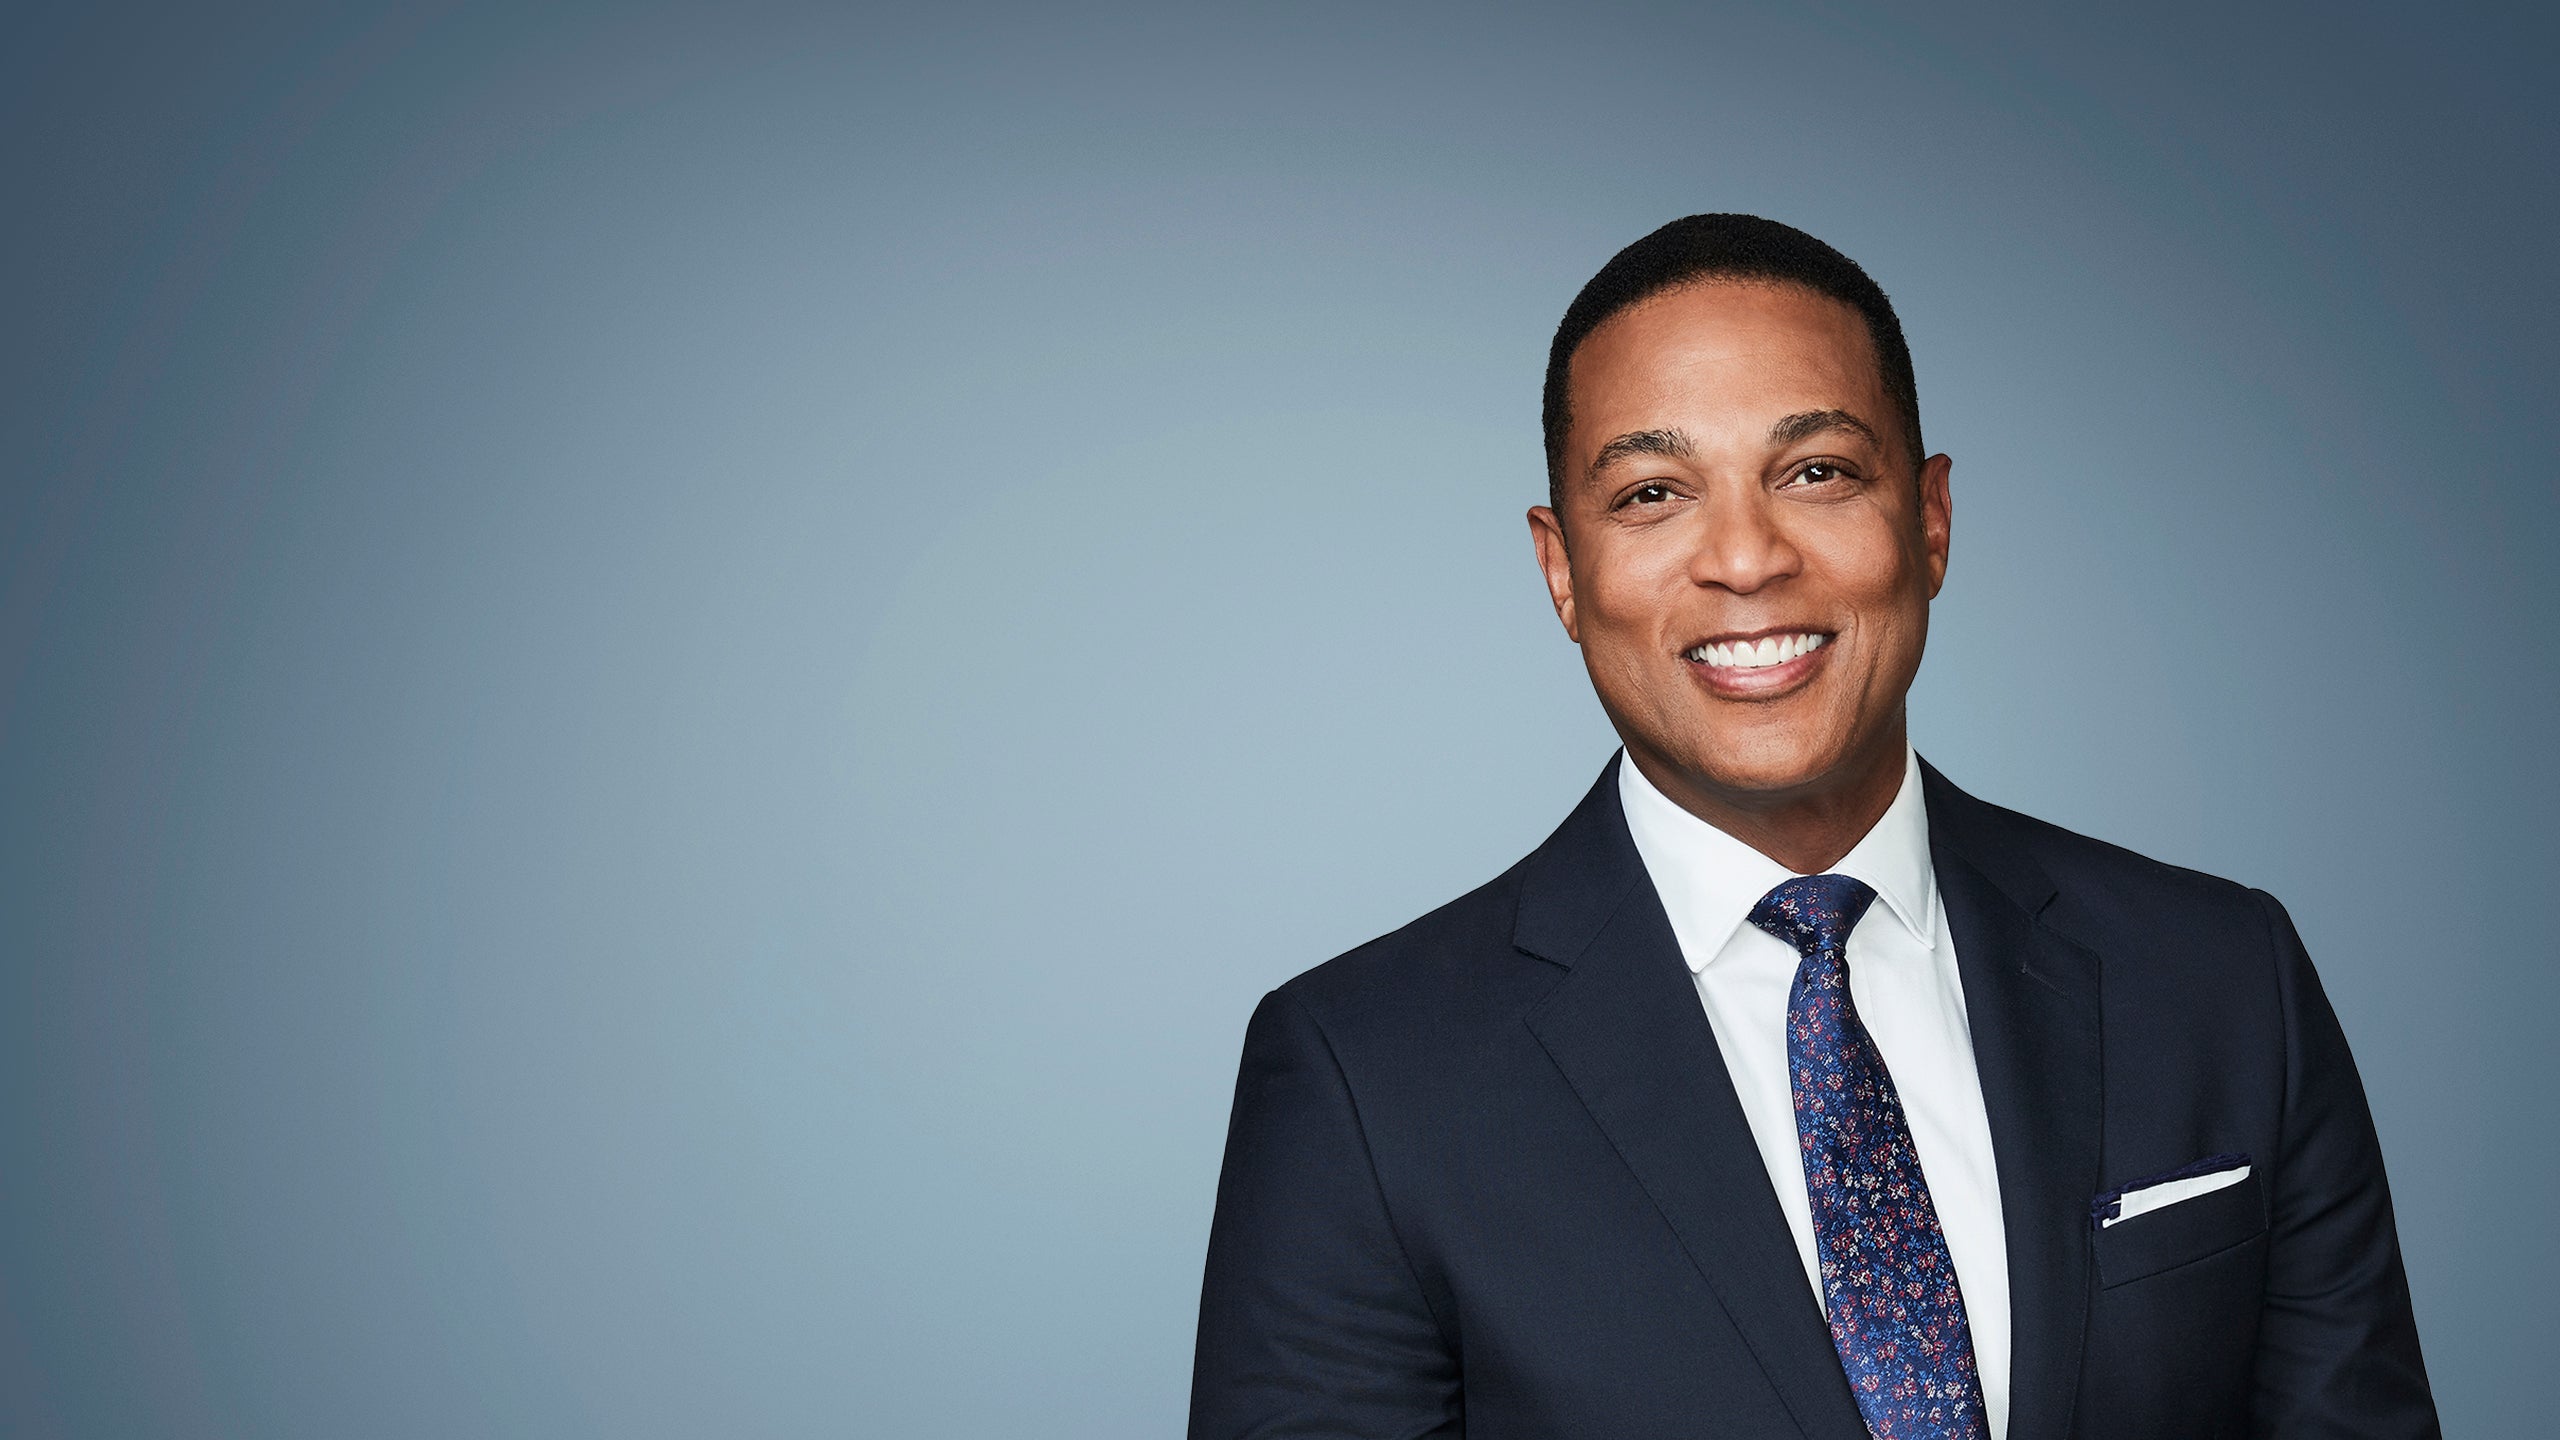 Don Lemon On His New Book 'This Is The Fire' And Why He Doesn't See Our Country Going Backward Again